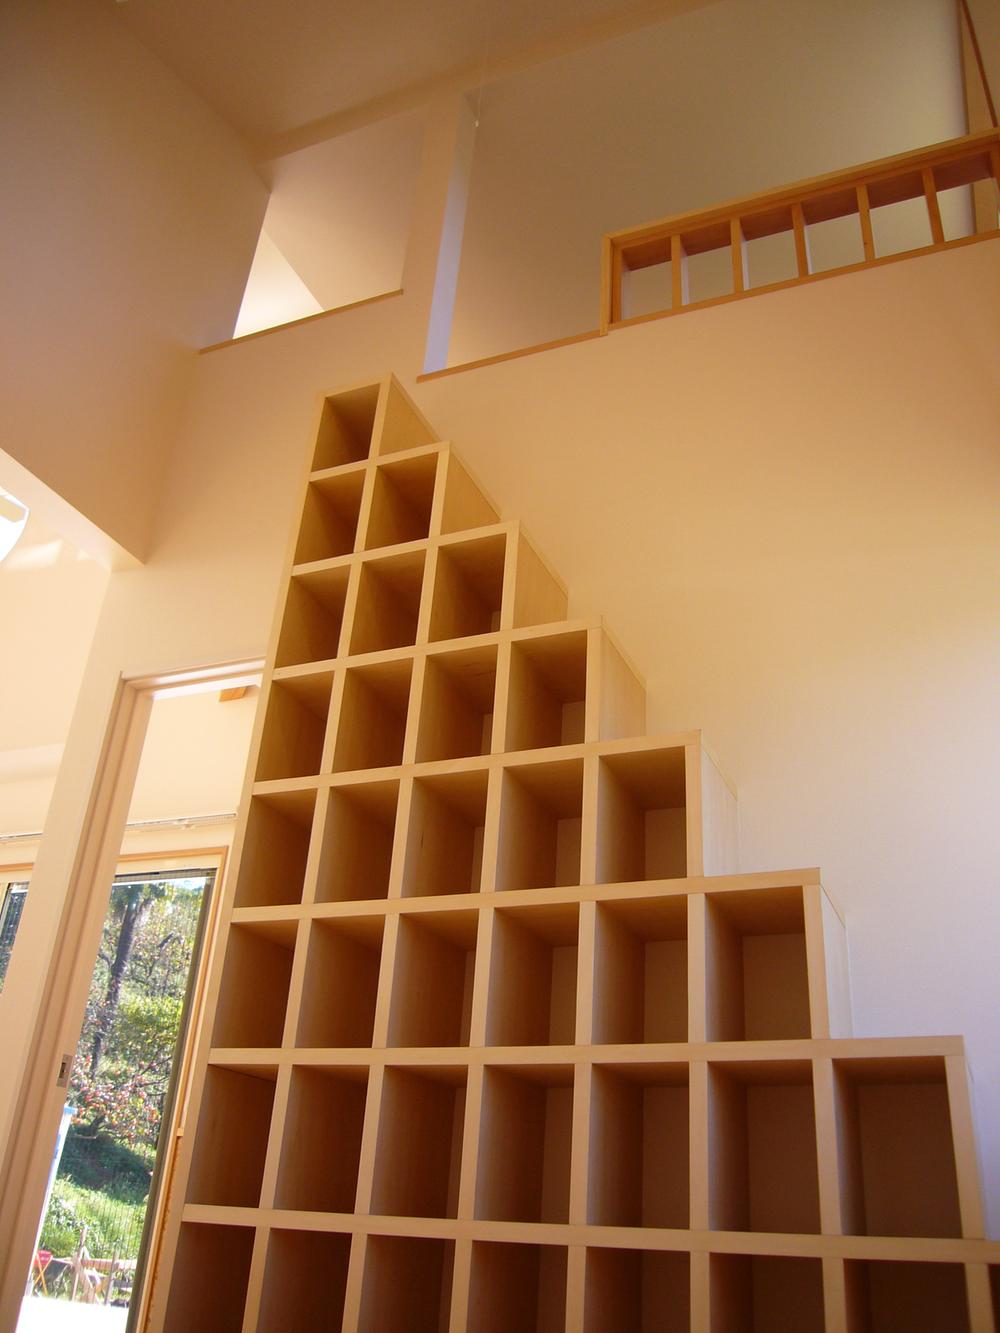 Building plan example (introspection photo). loft Stairs